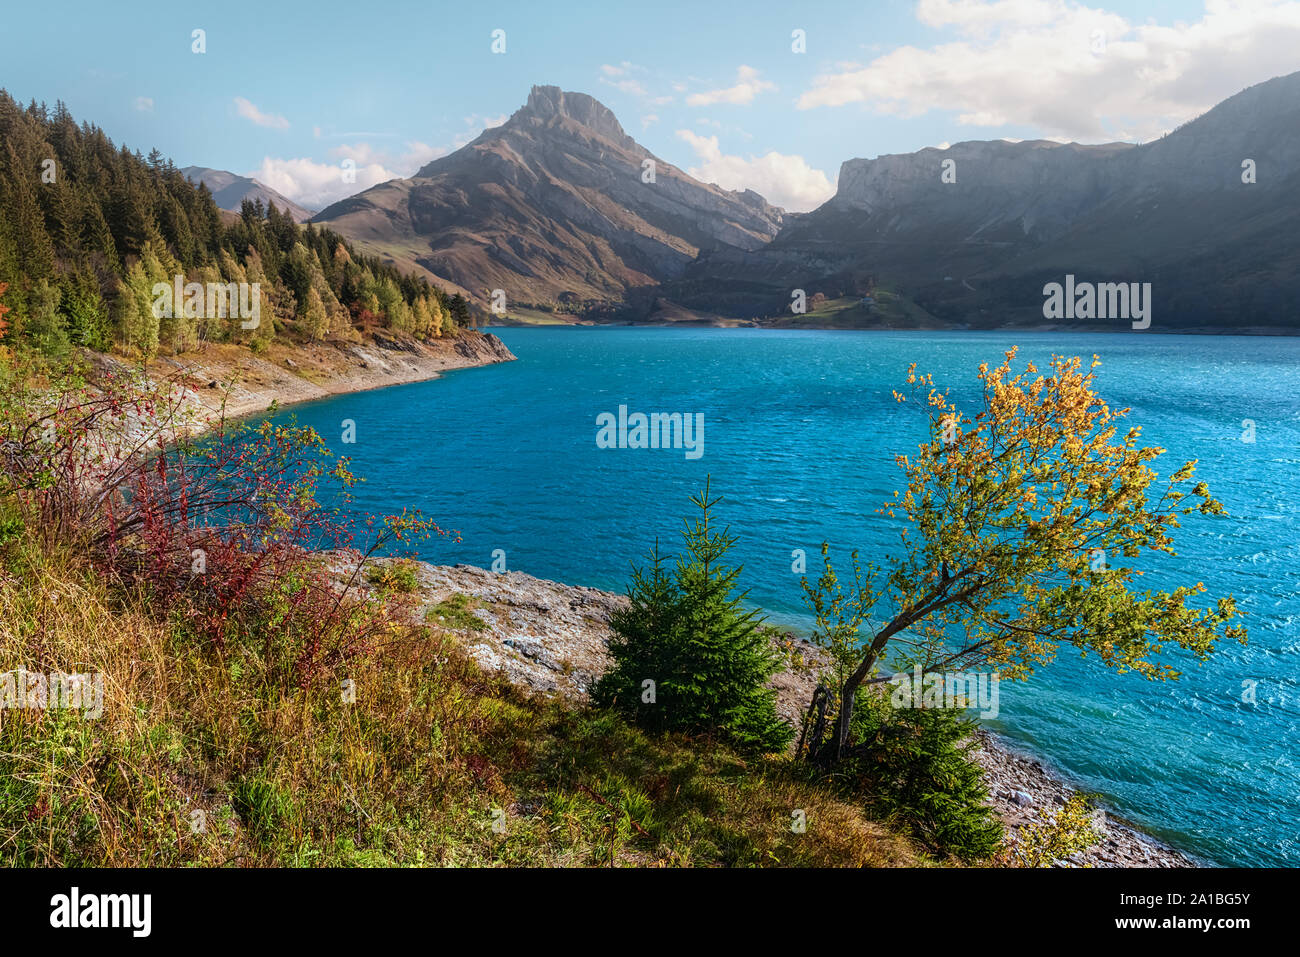 Sunny day on Roselend lake (Lac de Roselend) in France Alps. Blue water and high mountains in background. Landscape photography Stock Photo